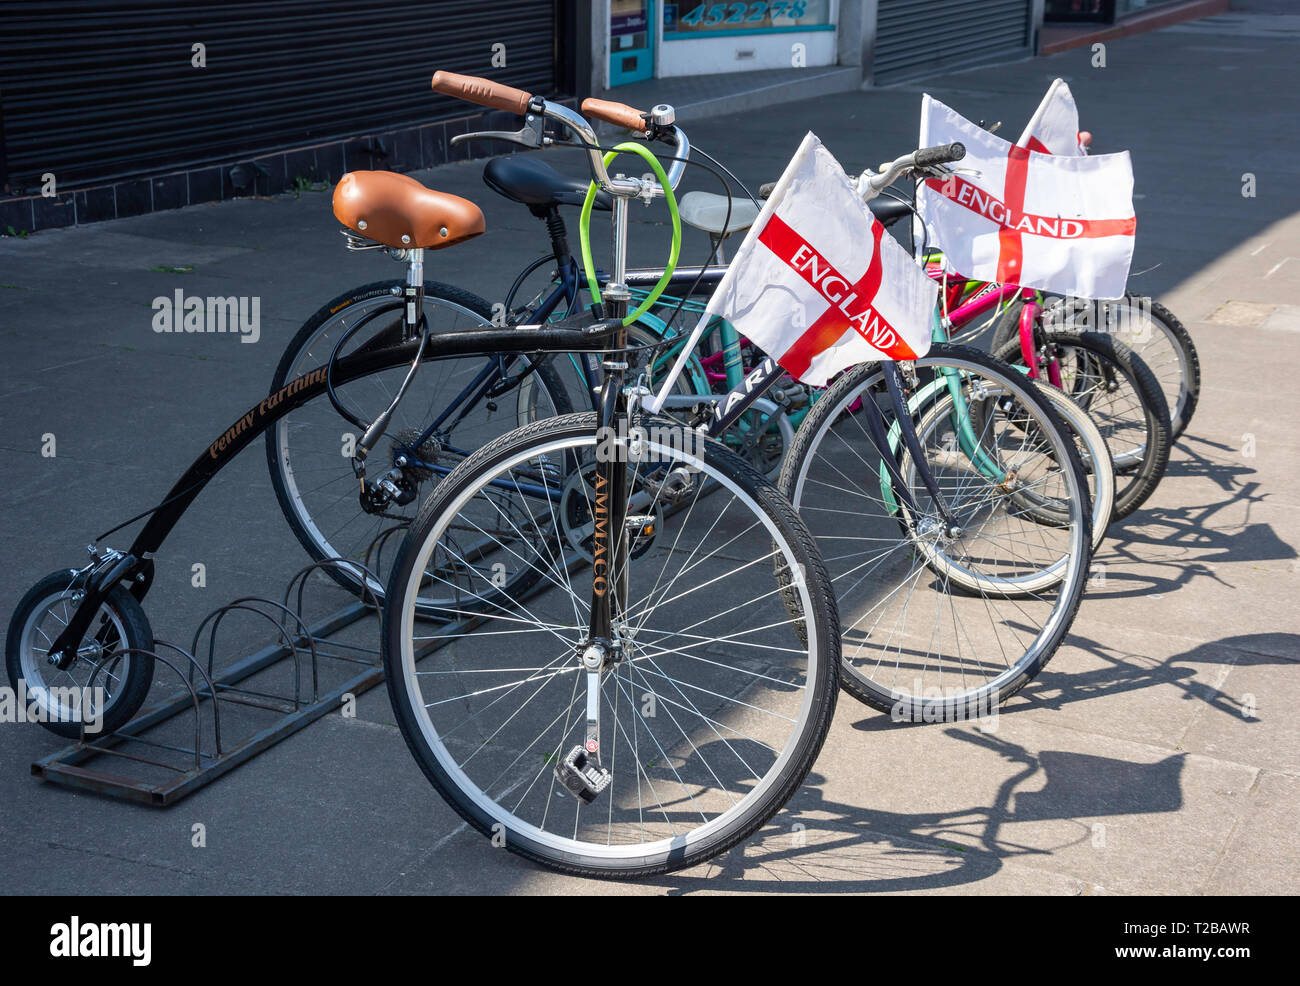 Bicycle stand, Hornchurch High Street, Hornchurch, London Borough of Havering, Greater London, England, United Kingdom Stock Photo